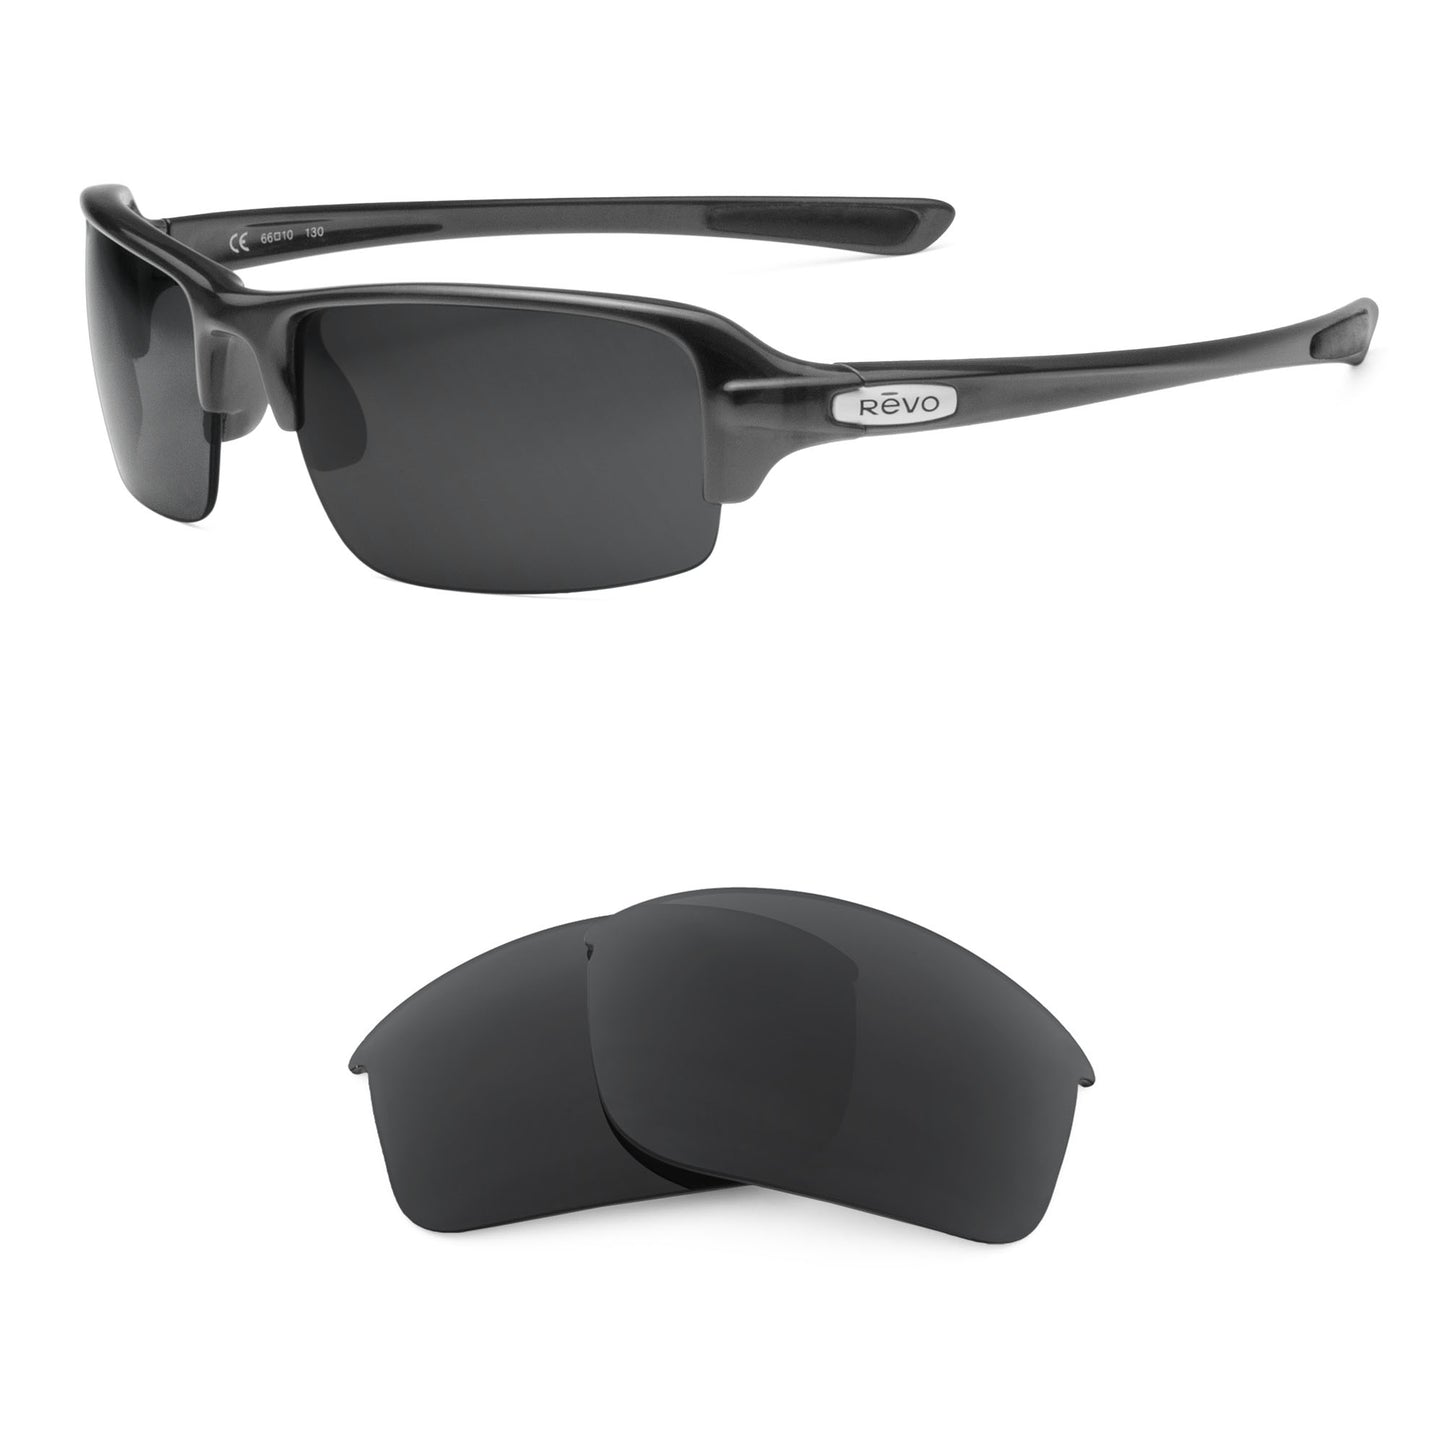 Revo Abyss RE4041 sunglasses with replacement lenses